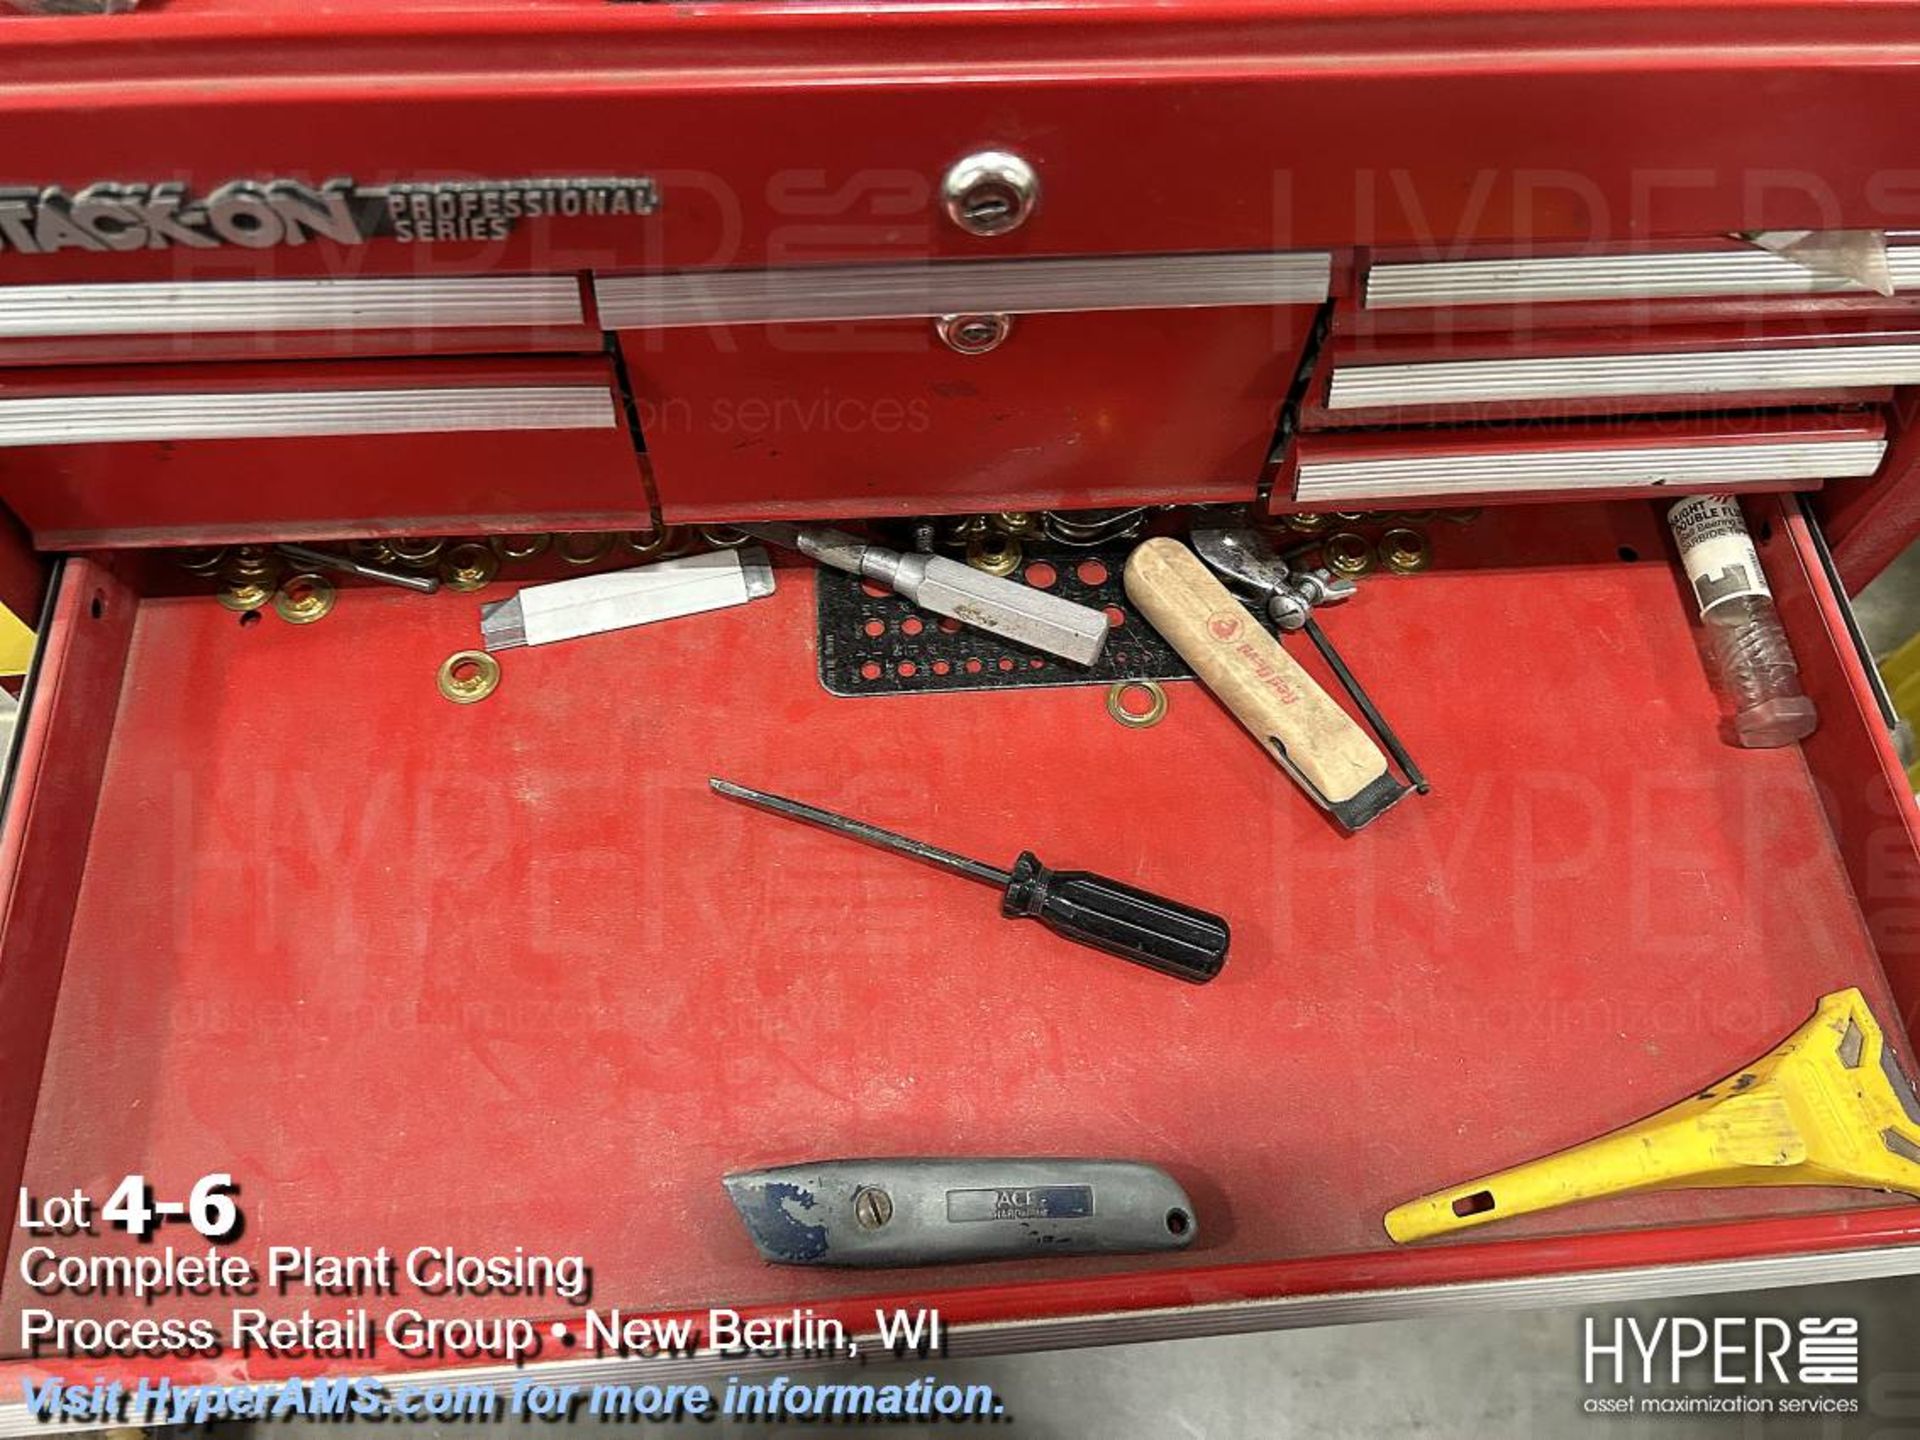 Stack-on roll around toolbox - Image 6 of 12